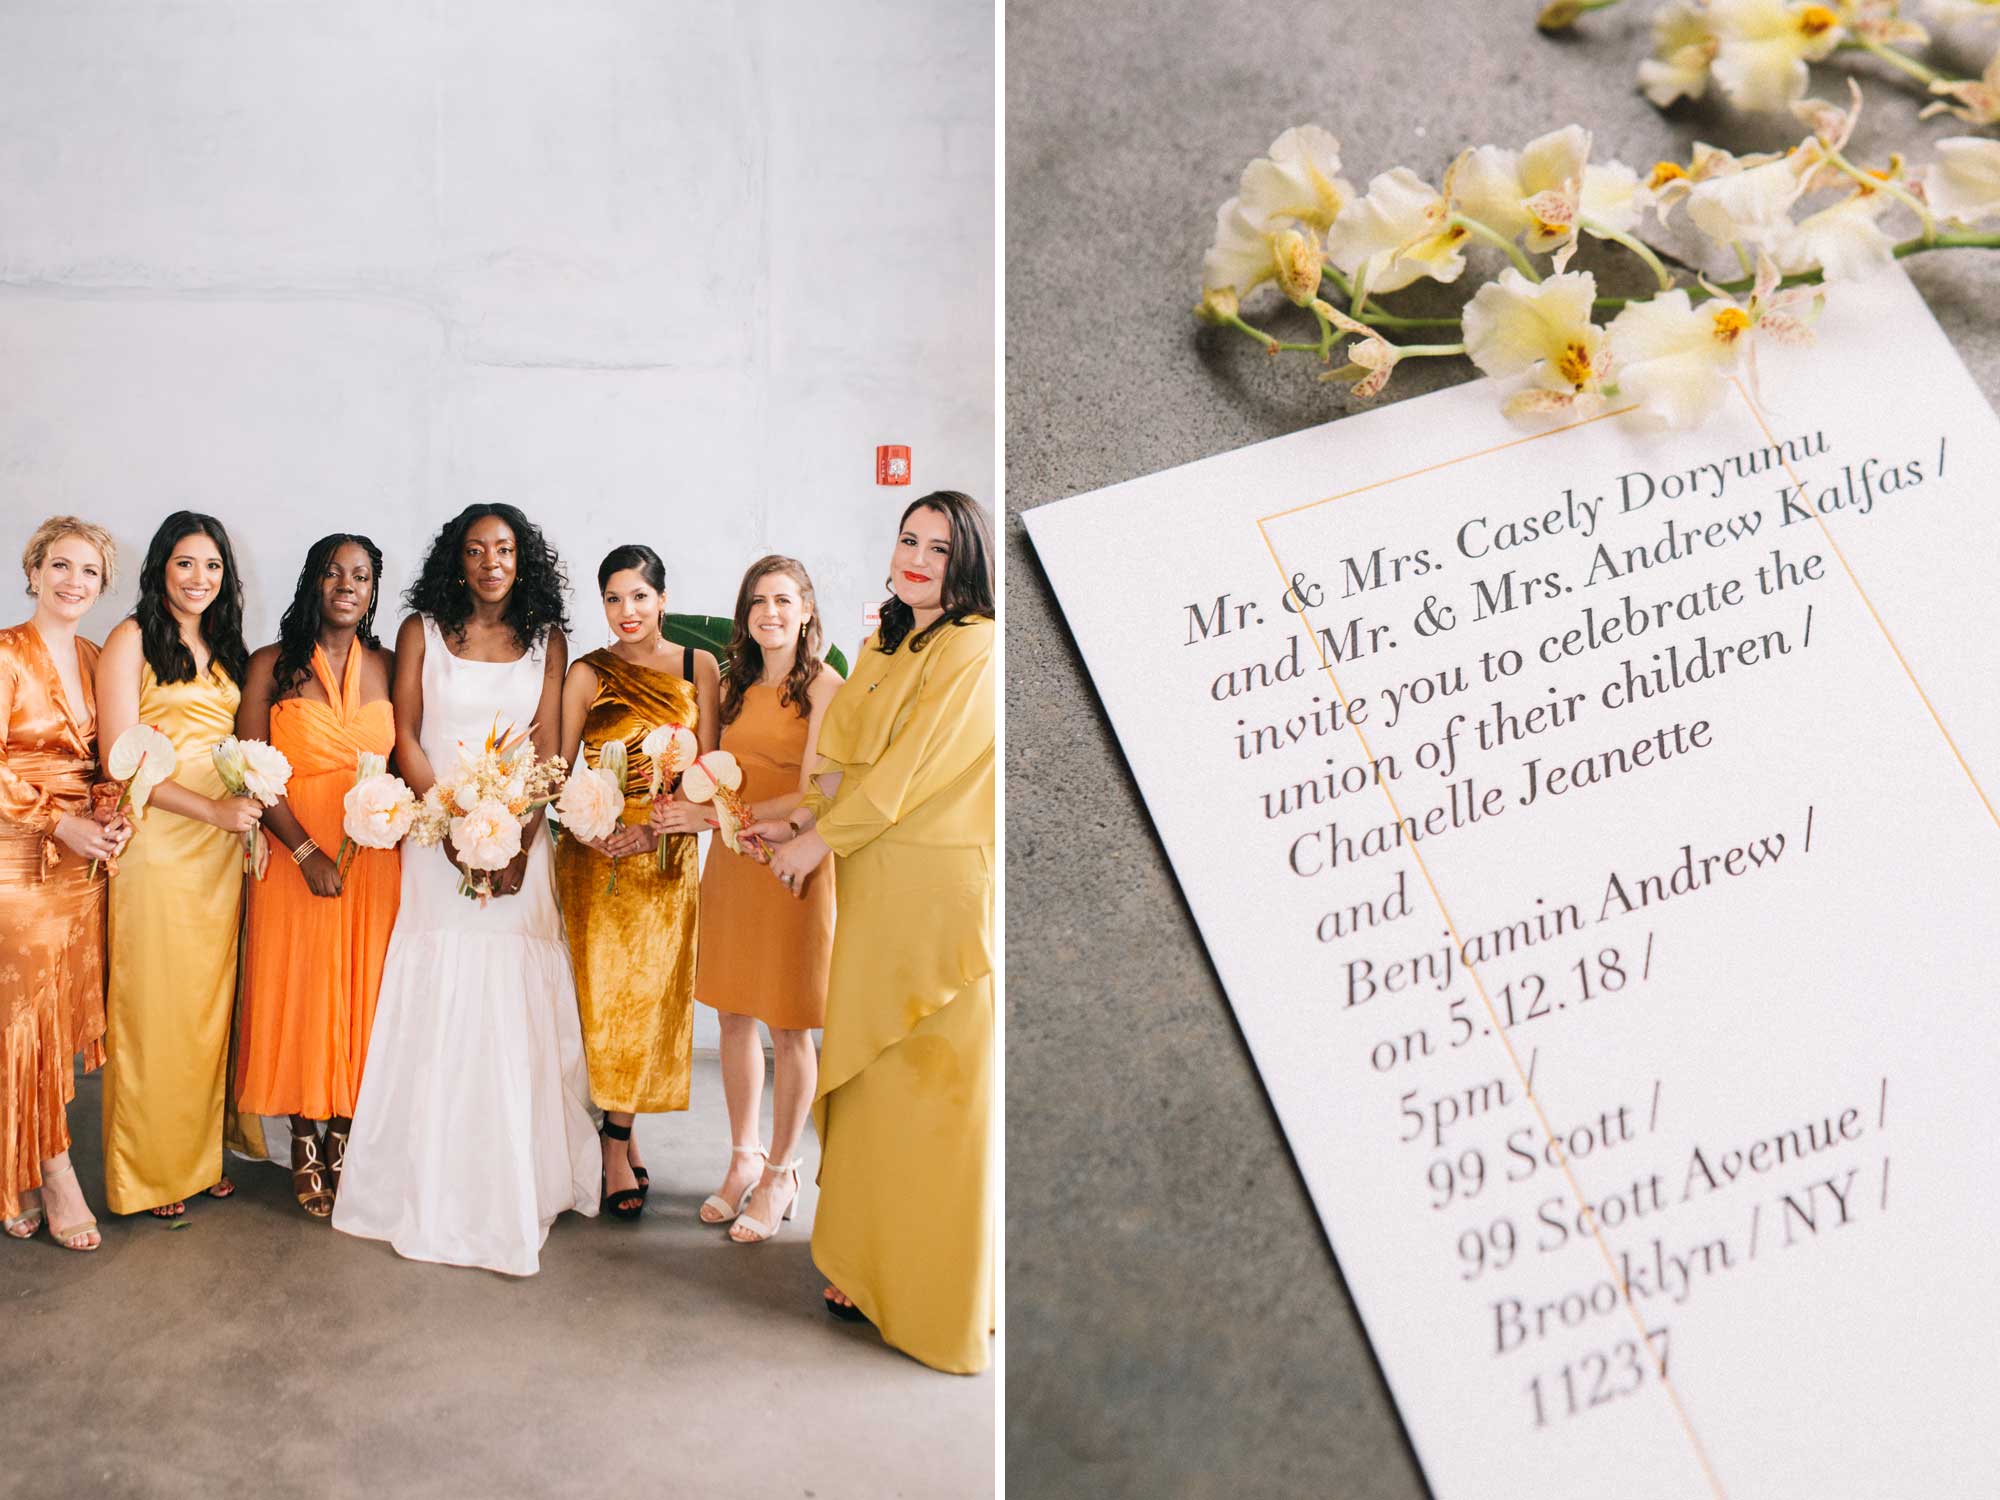 Faille A-line Gown with Gathered Tiers and Mix Match Orange Bridesmaids Dresses